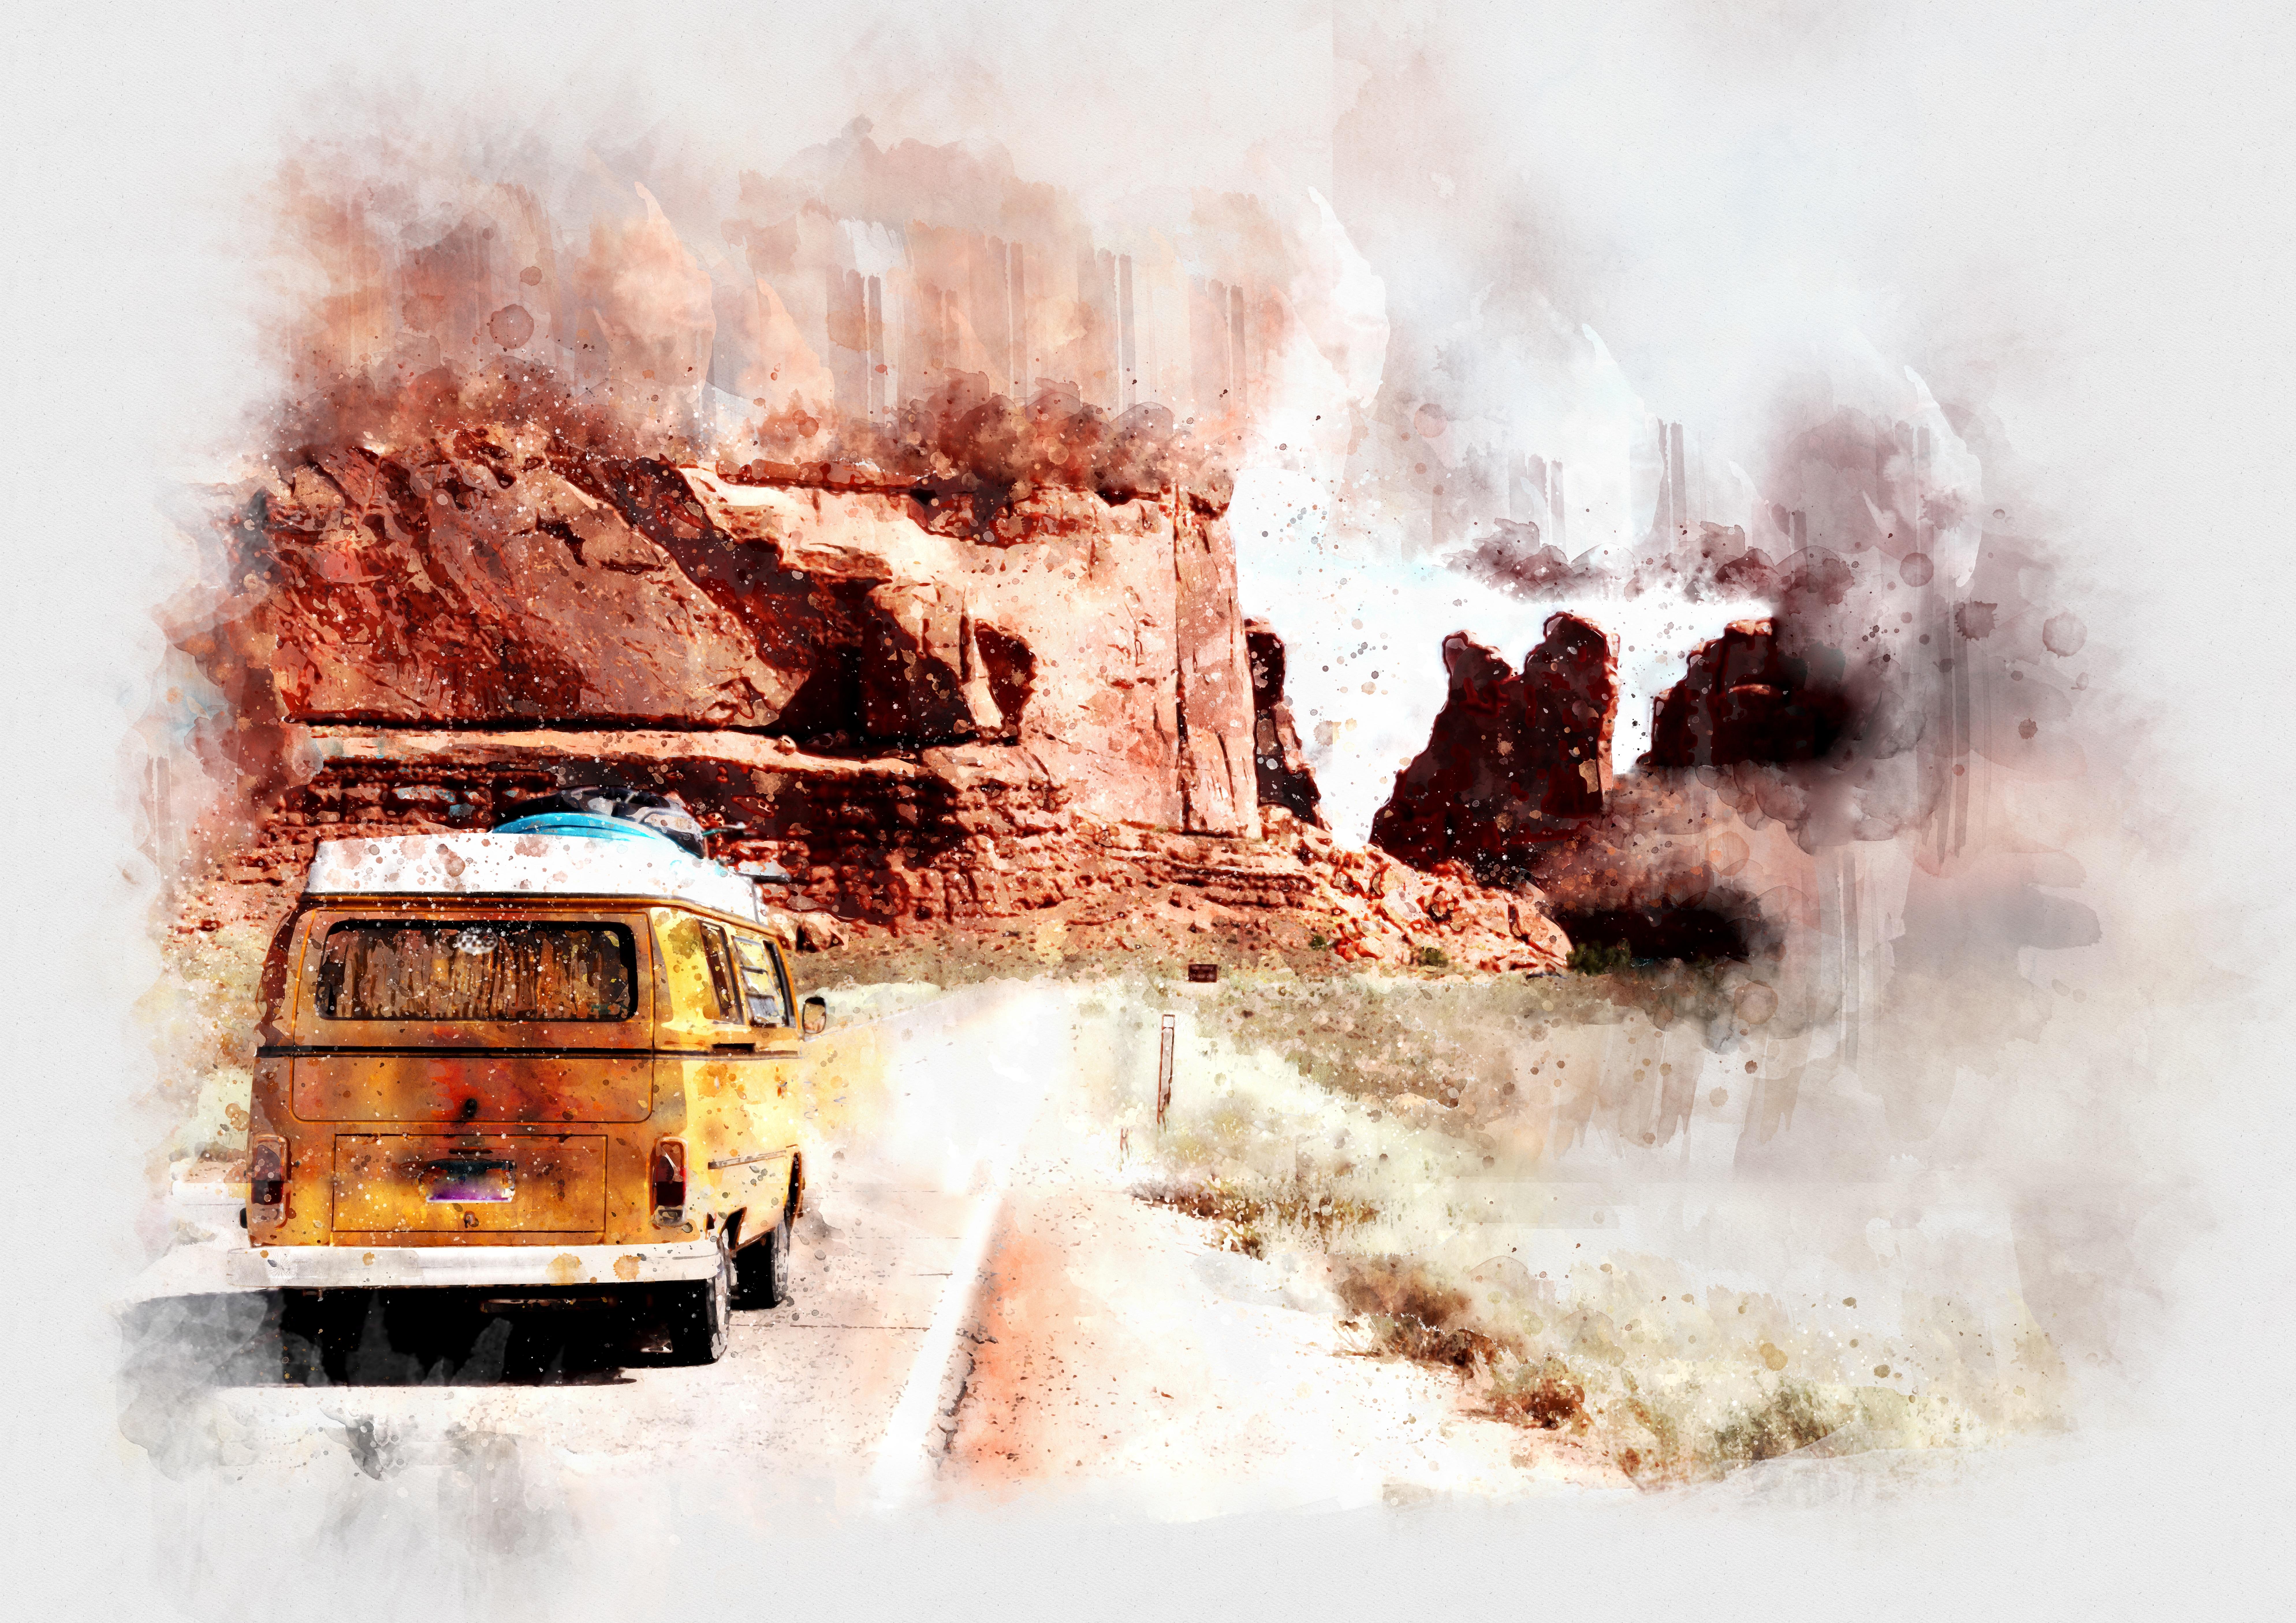 Picture Photo painting on canvas - Road and minibus 3